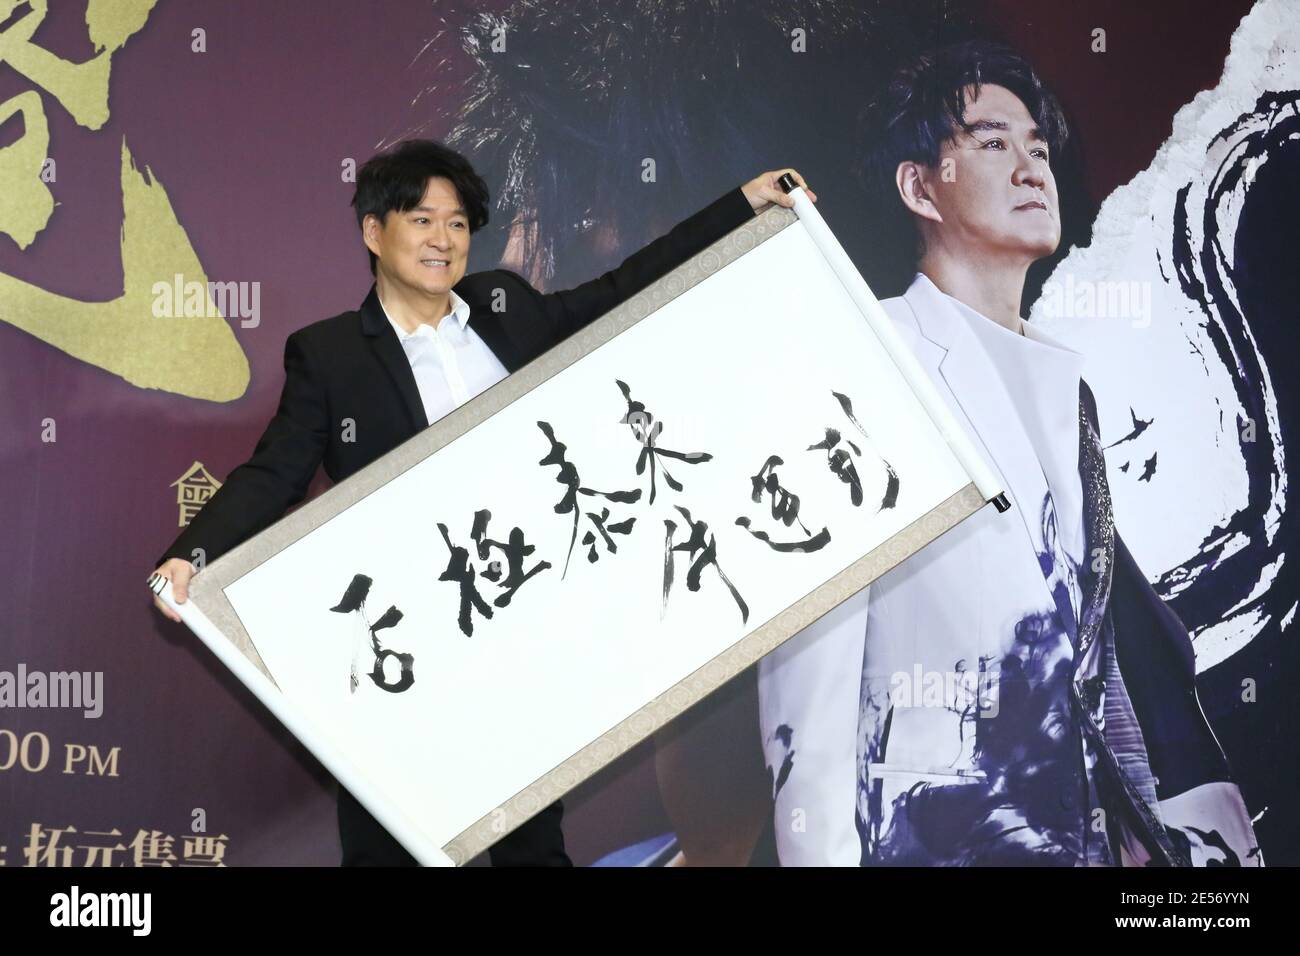 Taipei. 25th Jan, 2021. Emil Chau attends the press conference to promote his concert which will be held in April and May in Taipei, Taiwan, China on January 25, 2021. (Photo by Top Photo/Sipa USA) Credit: Sipa USA/Alamy Live News Stock Photo